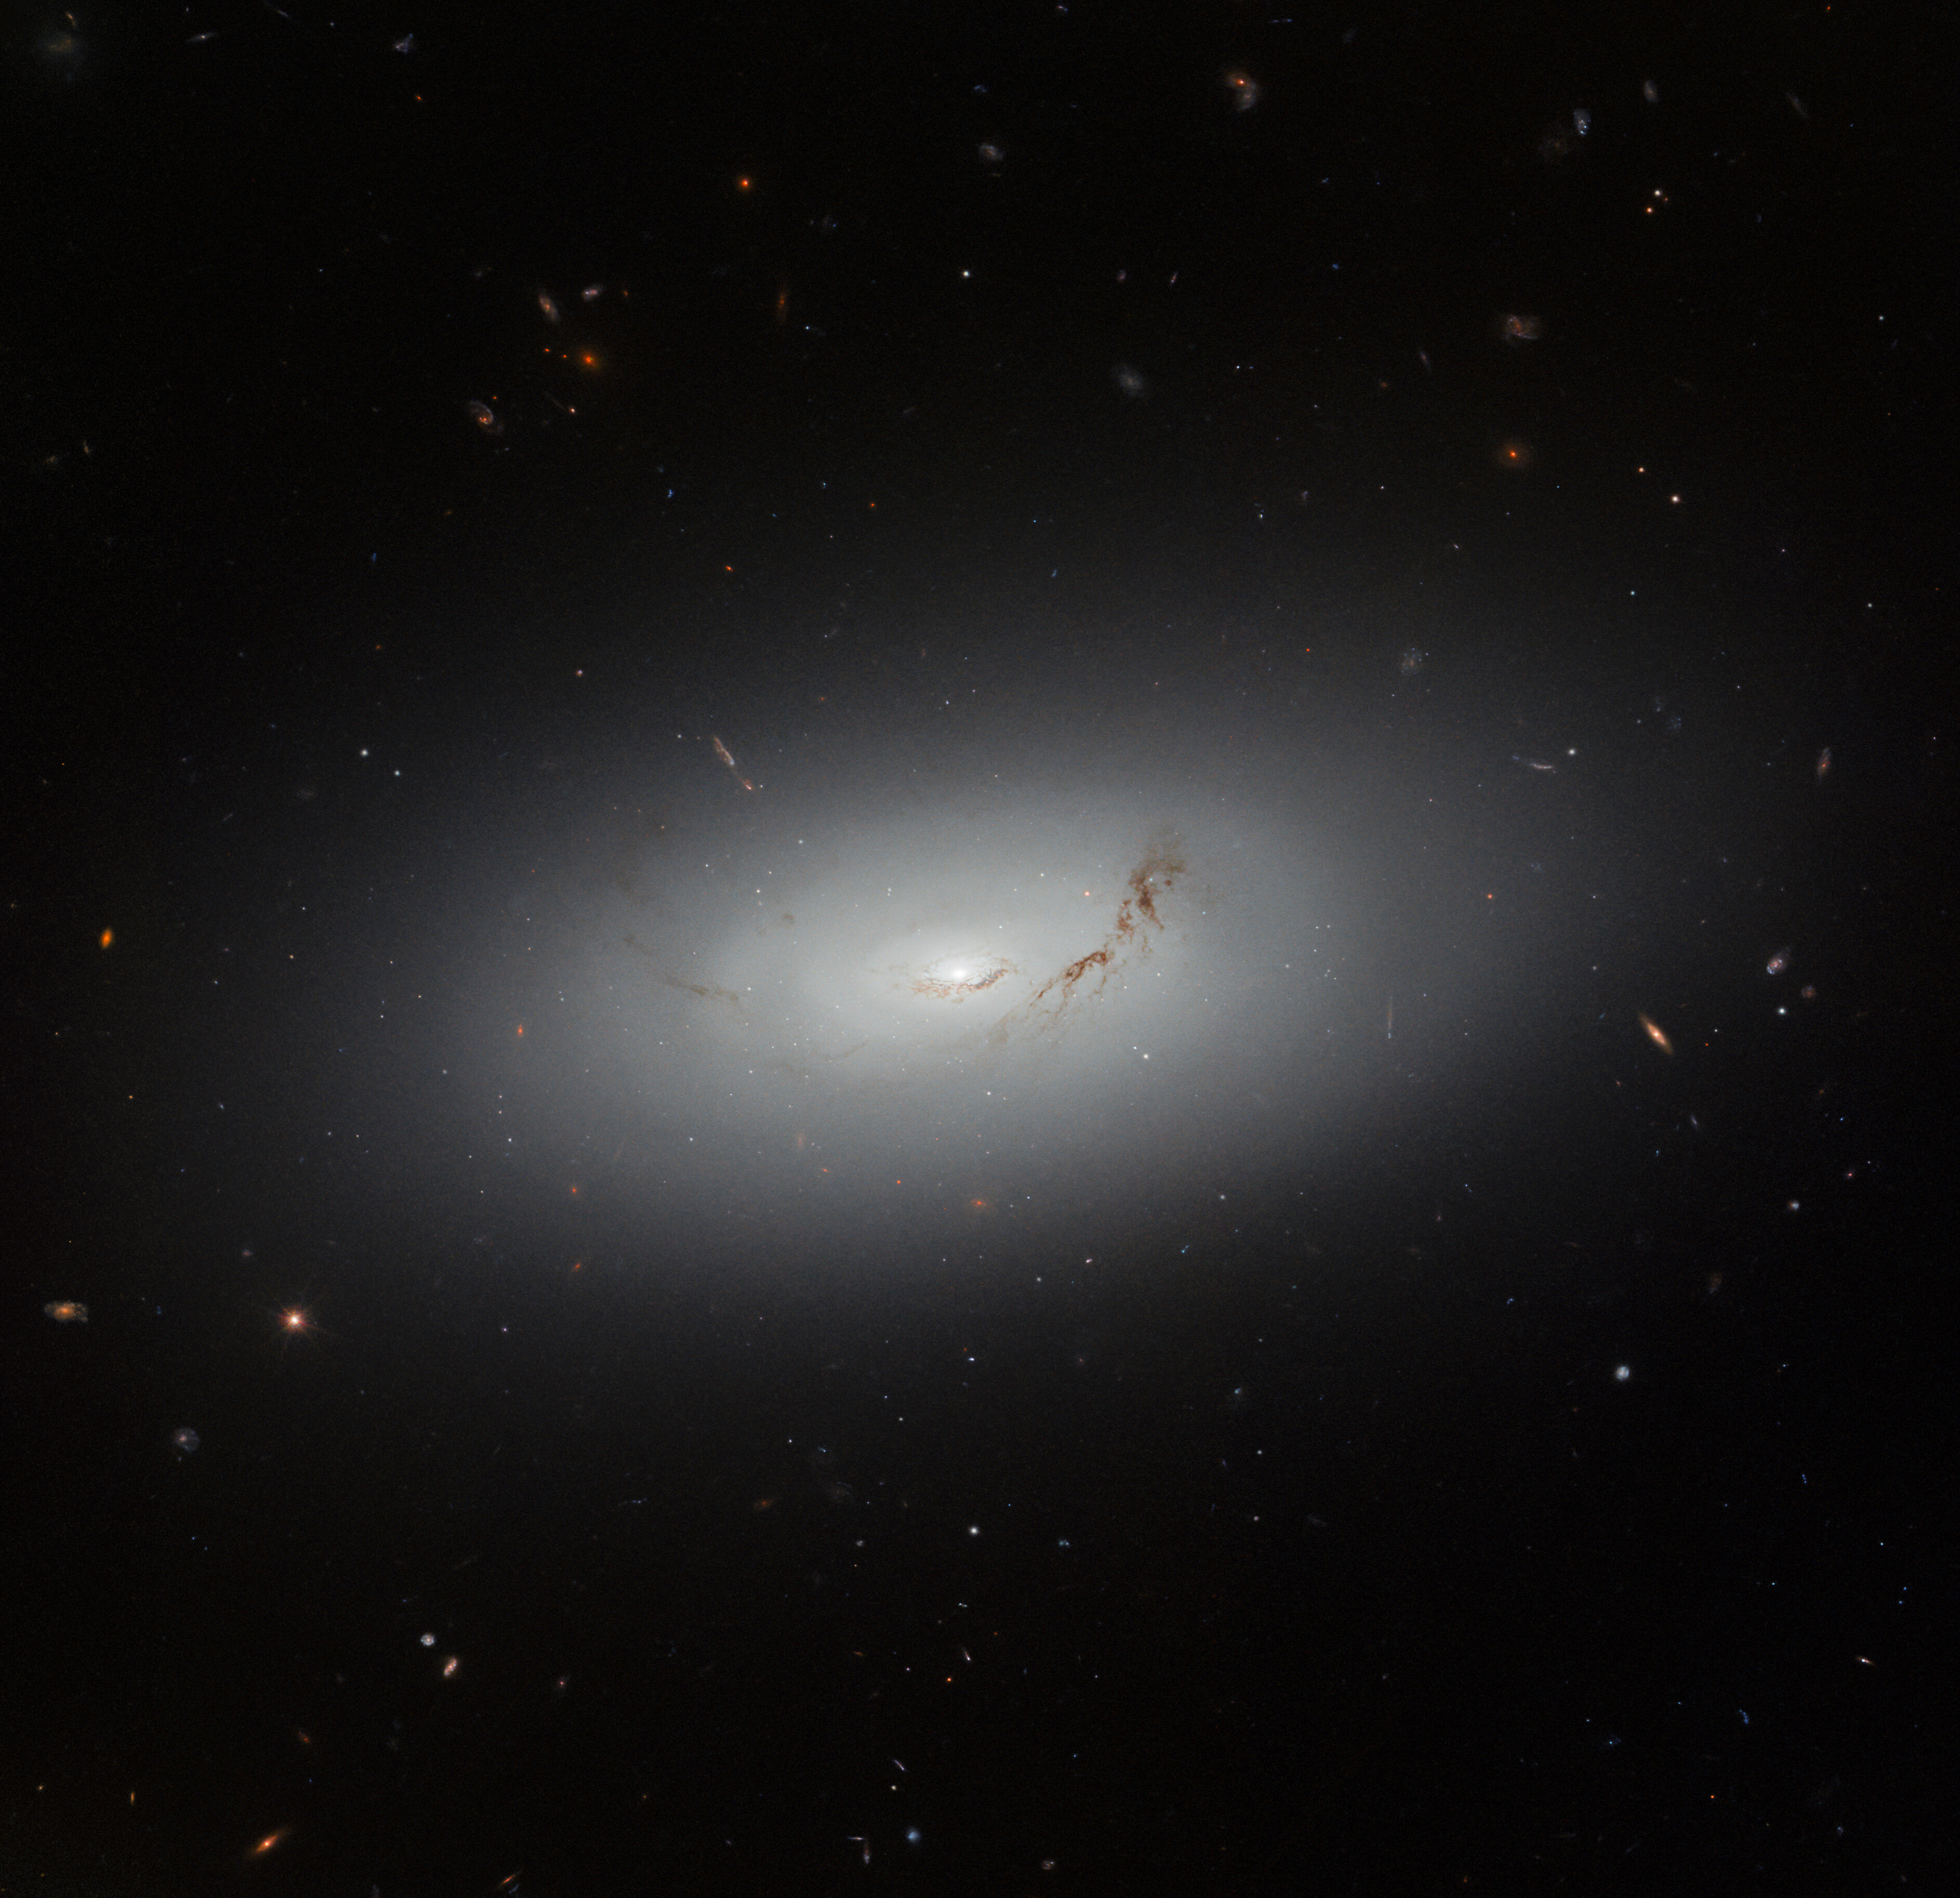 A large lenticular galaxy. It appears as faint, gray, concentric ovals that grow progressively brighter towards the bright core and fades away at the edge. Two threads of dark reddish-brown dust cross the galaxy’s disk, near its center. The background is black and mostly empty, with only a few point stars and small galaxies.